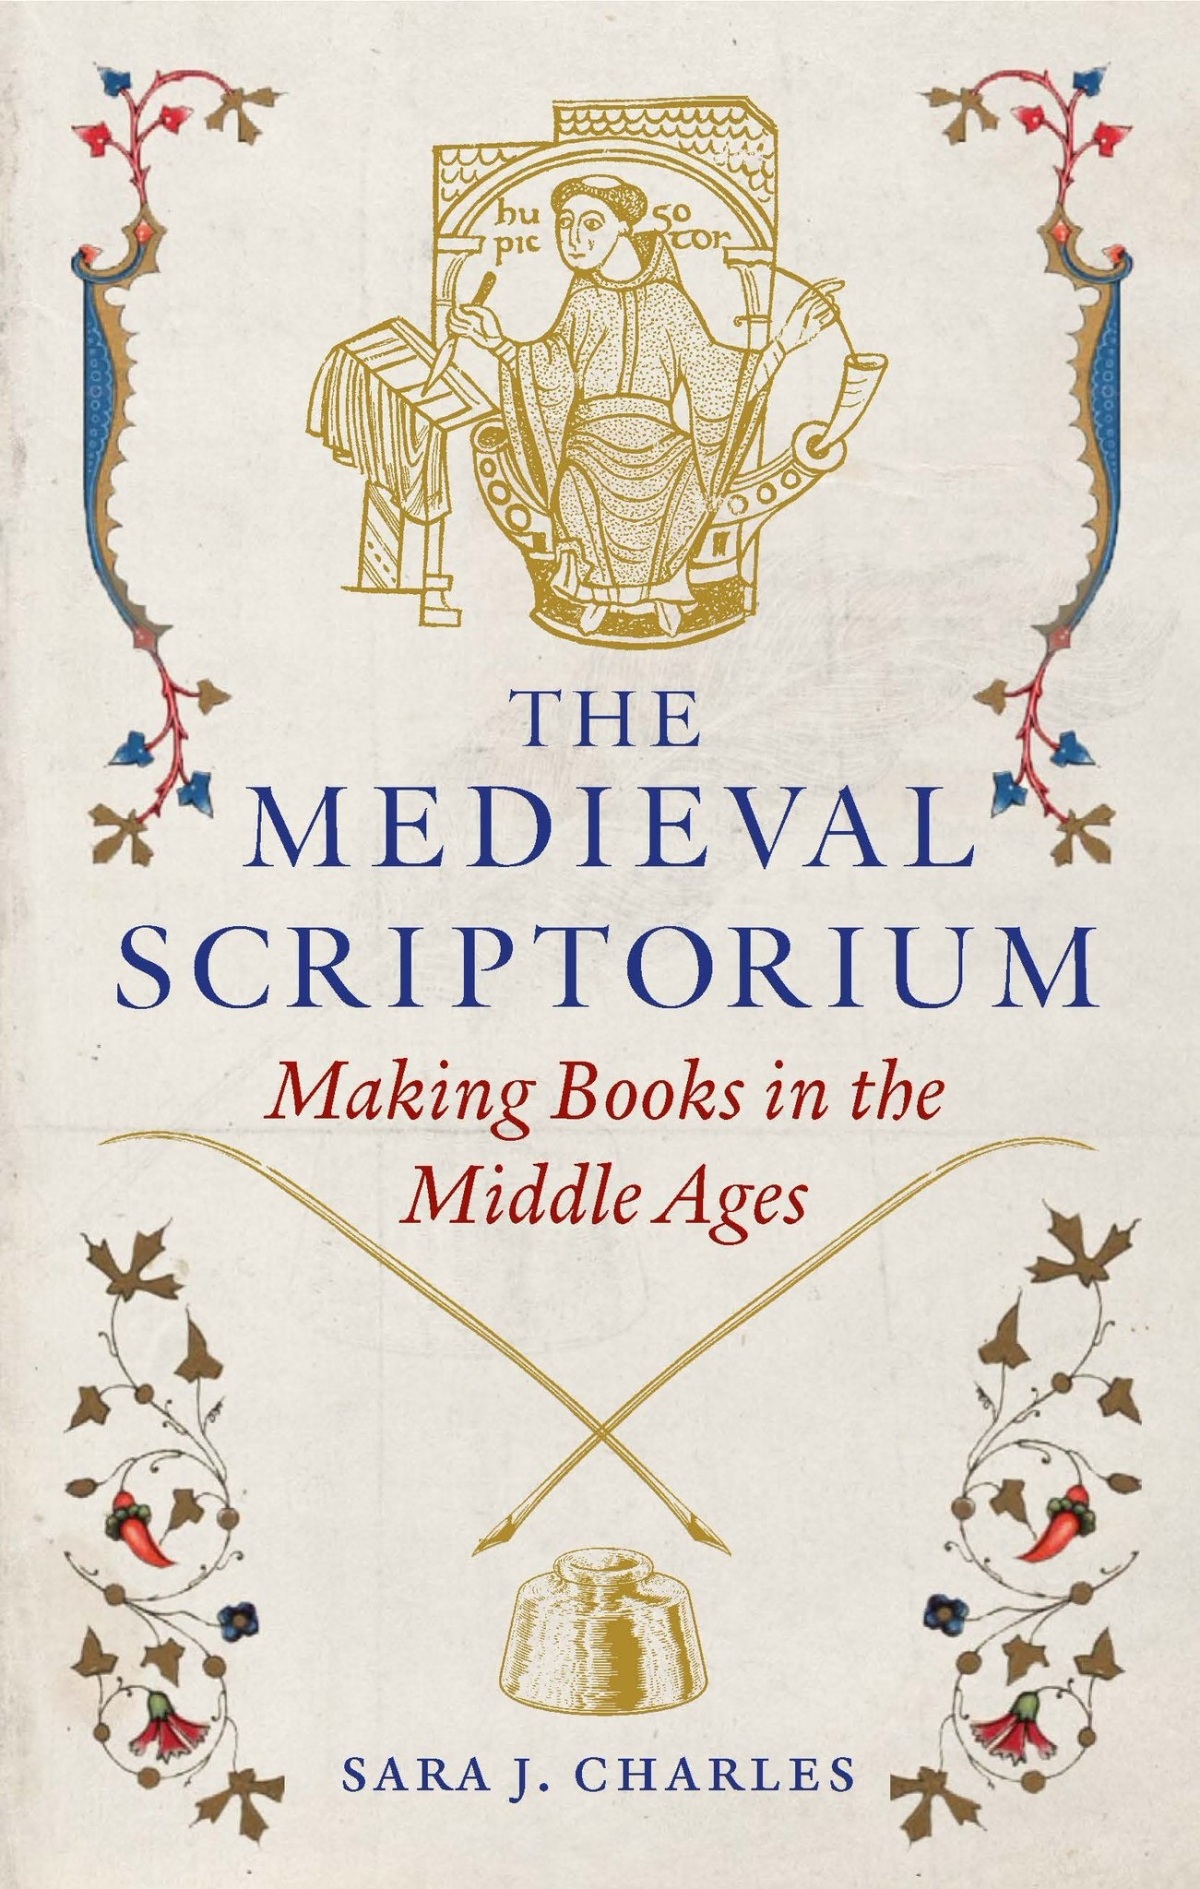 New Publication: ‘The Medieval Scriptorium: Making Books in the Middle Ages’, by Sara J. Charles